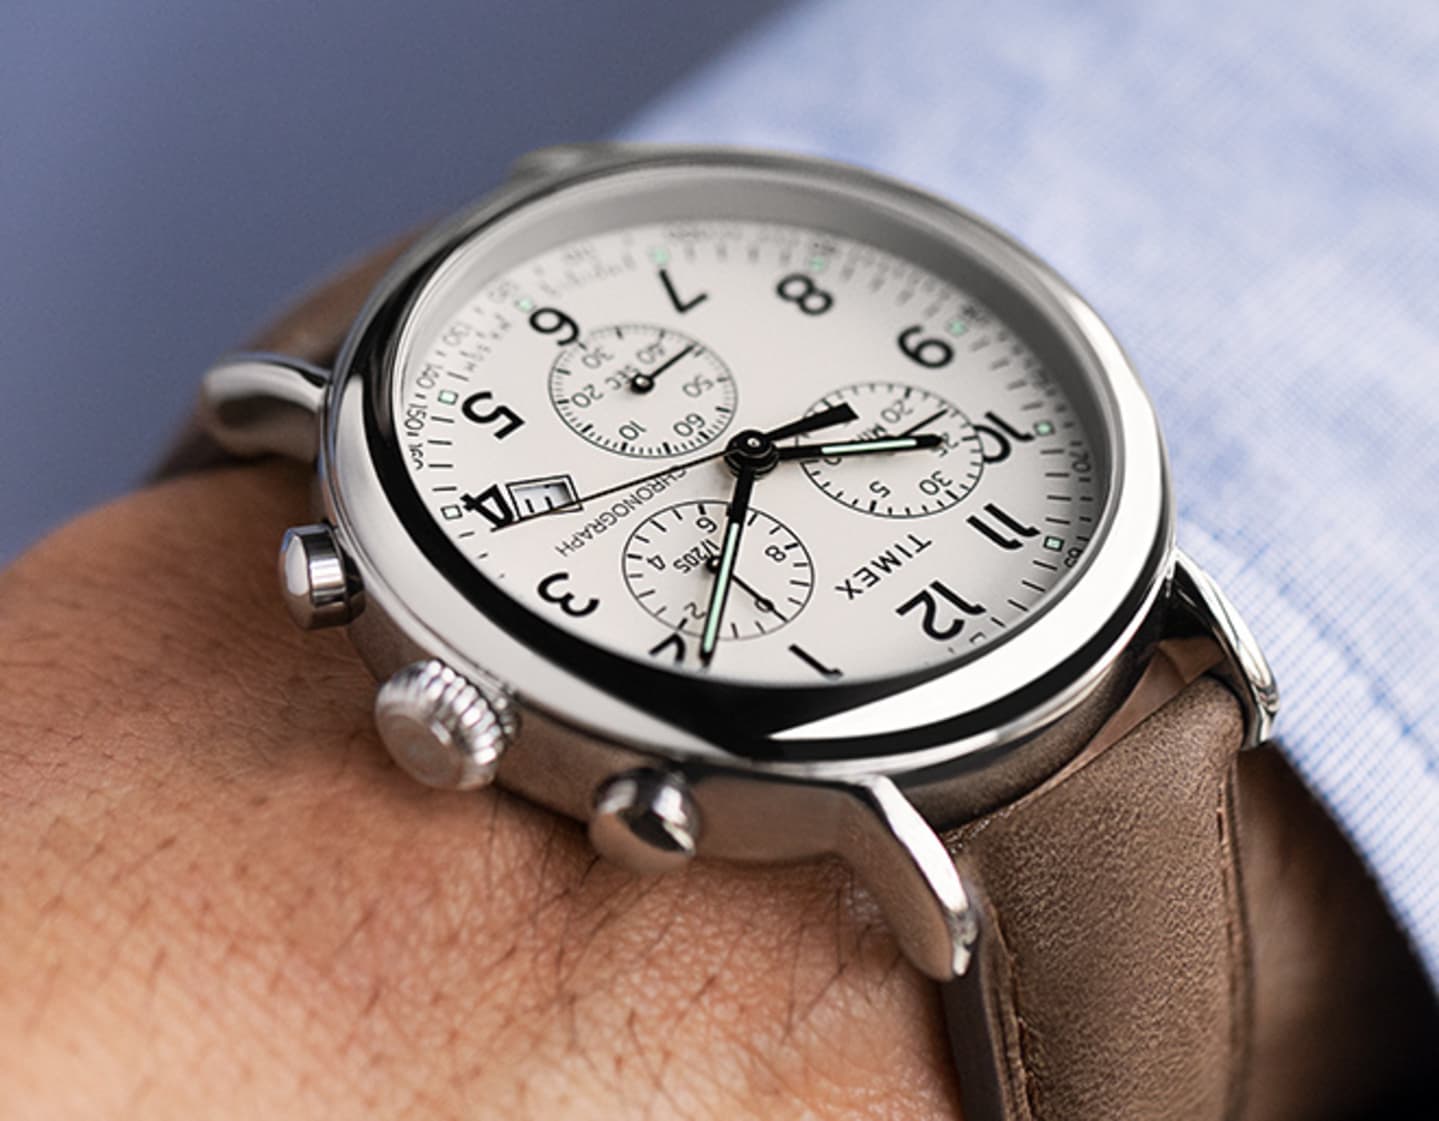 Timex Standard Chronograph Leather Strap Watch.